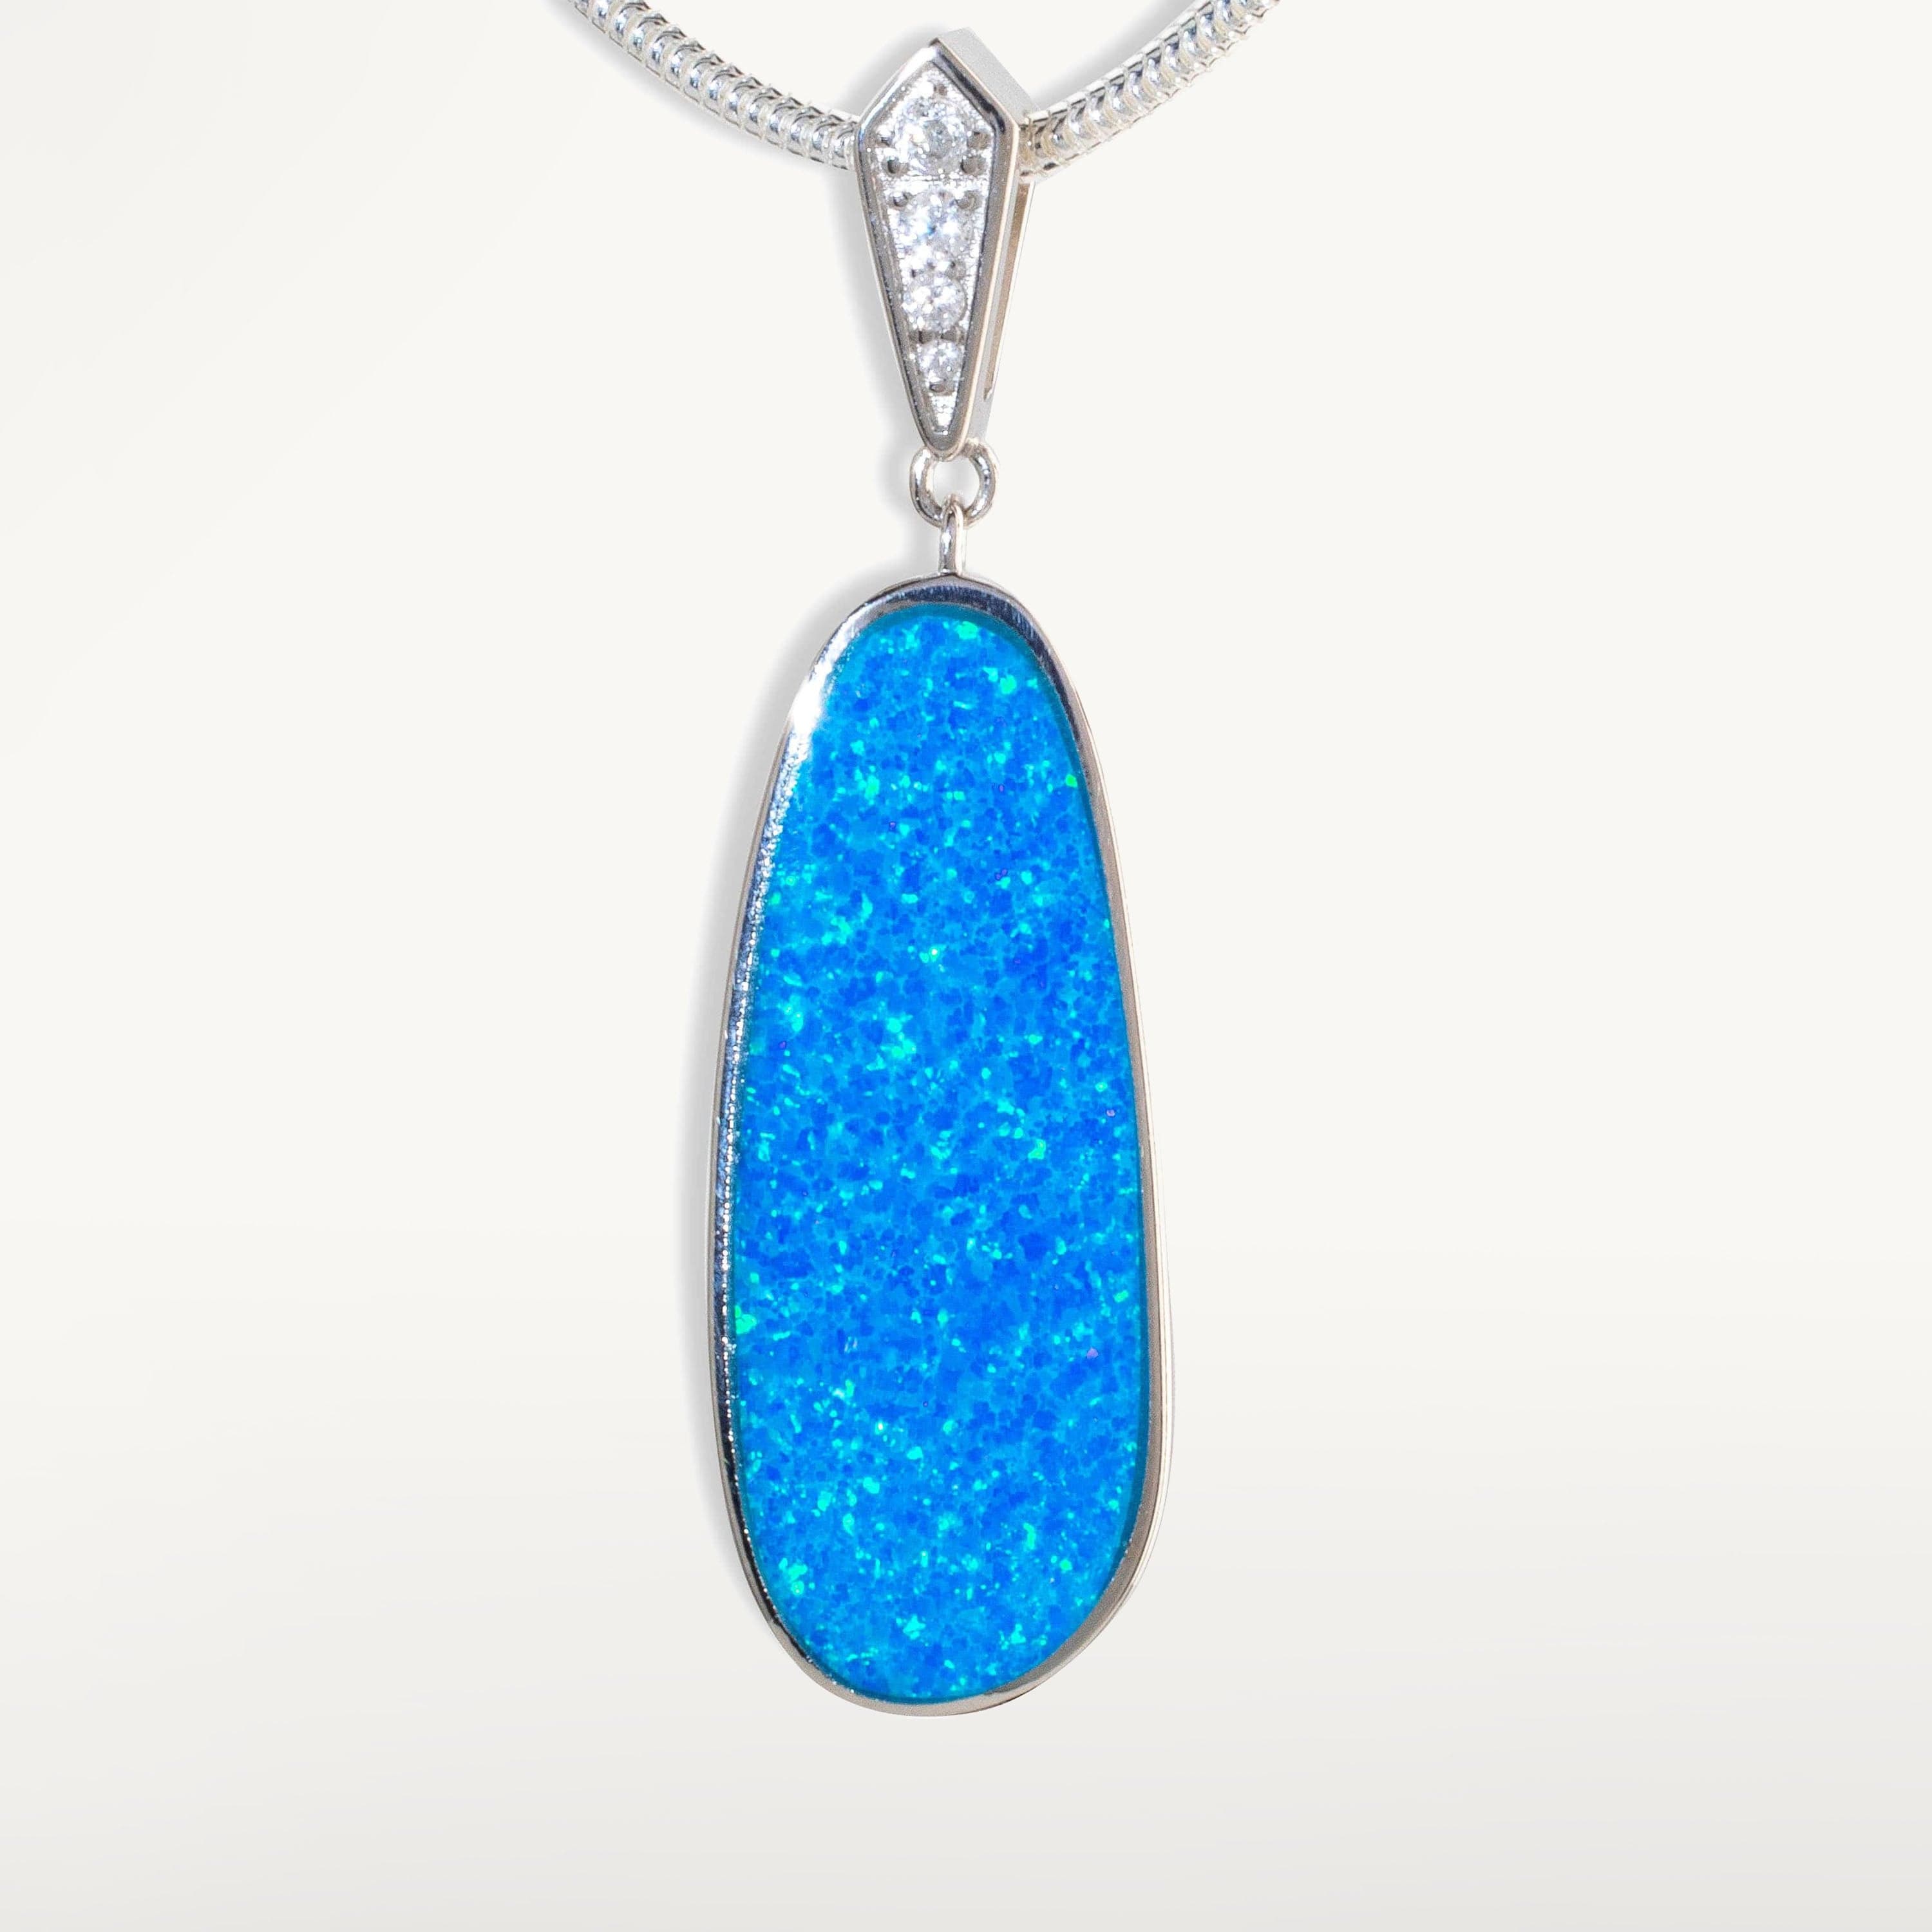 Kalifano Sterling Silver Opalite Sterling Silver Aqua Opal Teardrop Pendant with Sterling Silver Chain OPLP-33563-AO